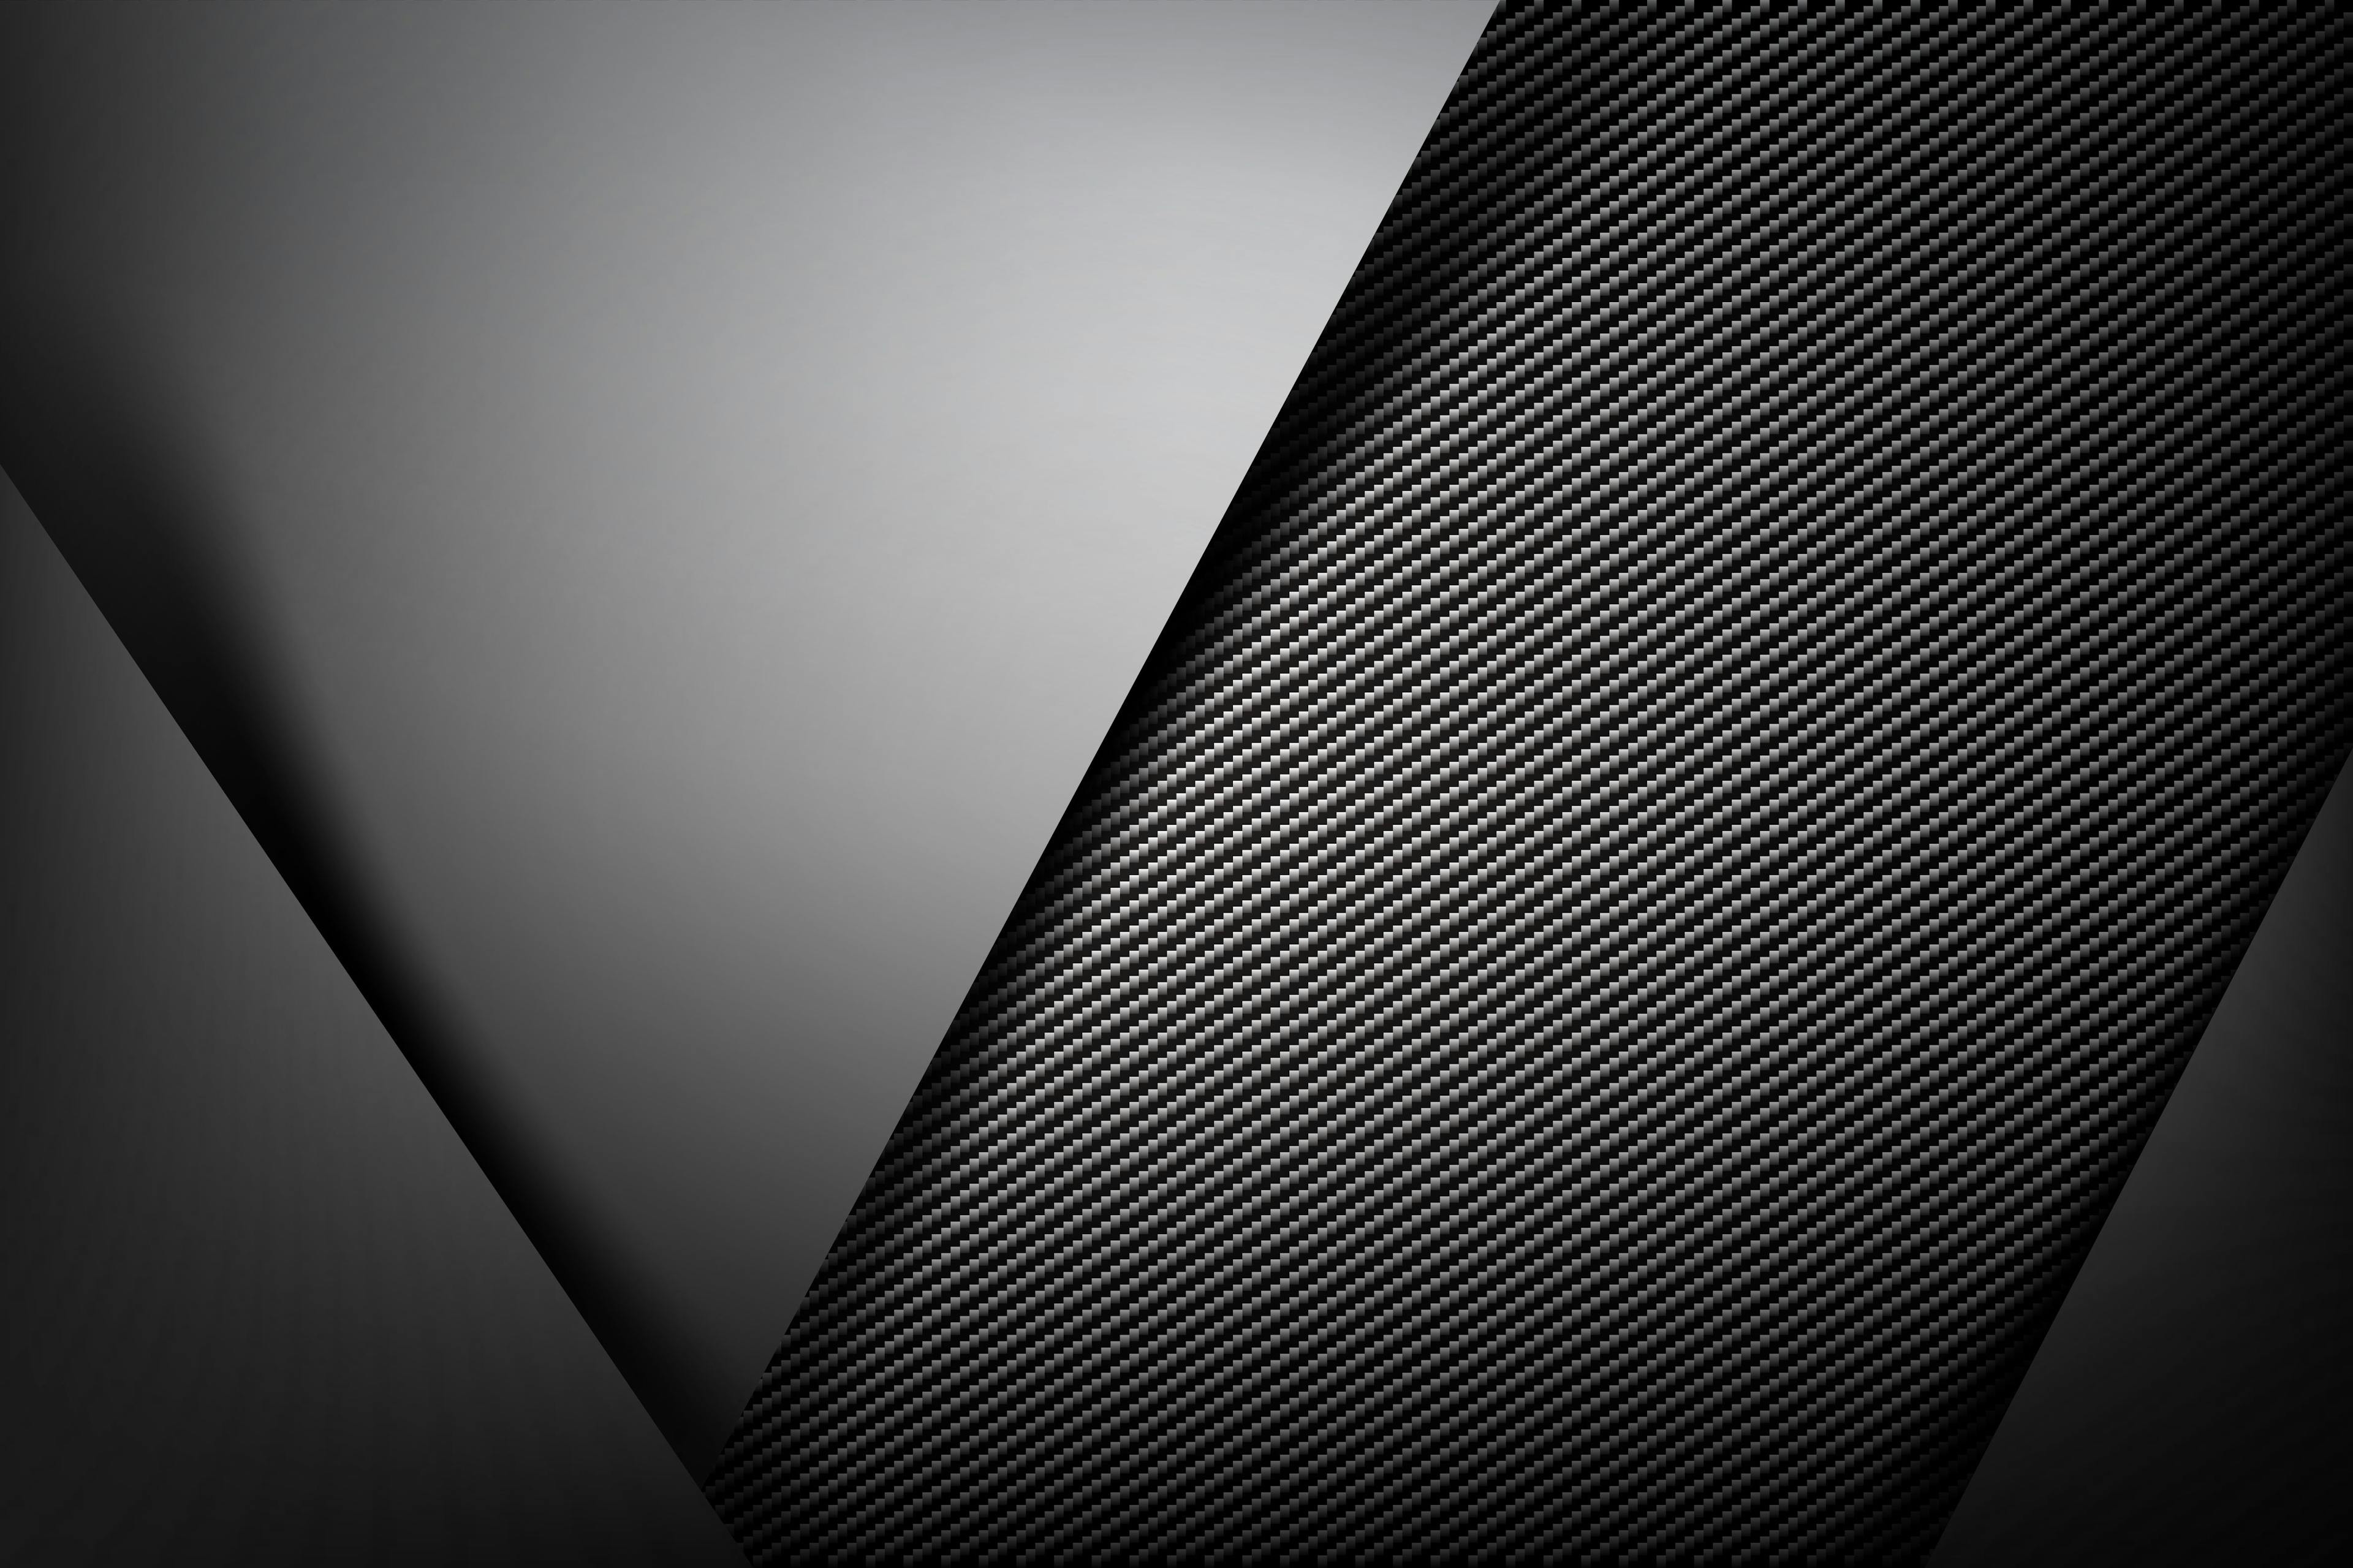 Abstract background dark with carbon fiber texture vector illust | Image Credit: © Kaikoro - stock.adobe.com